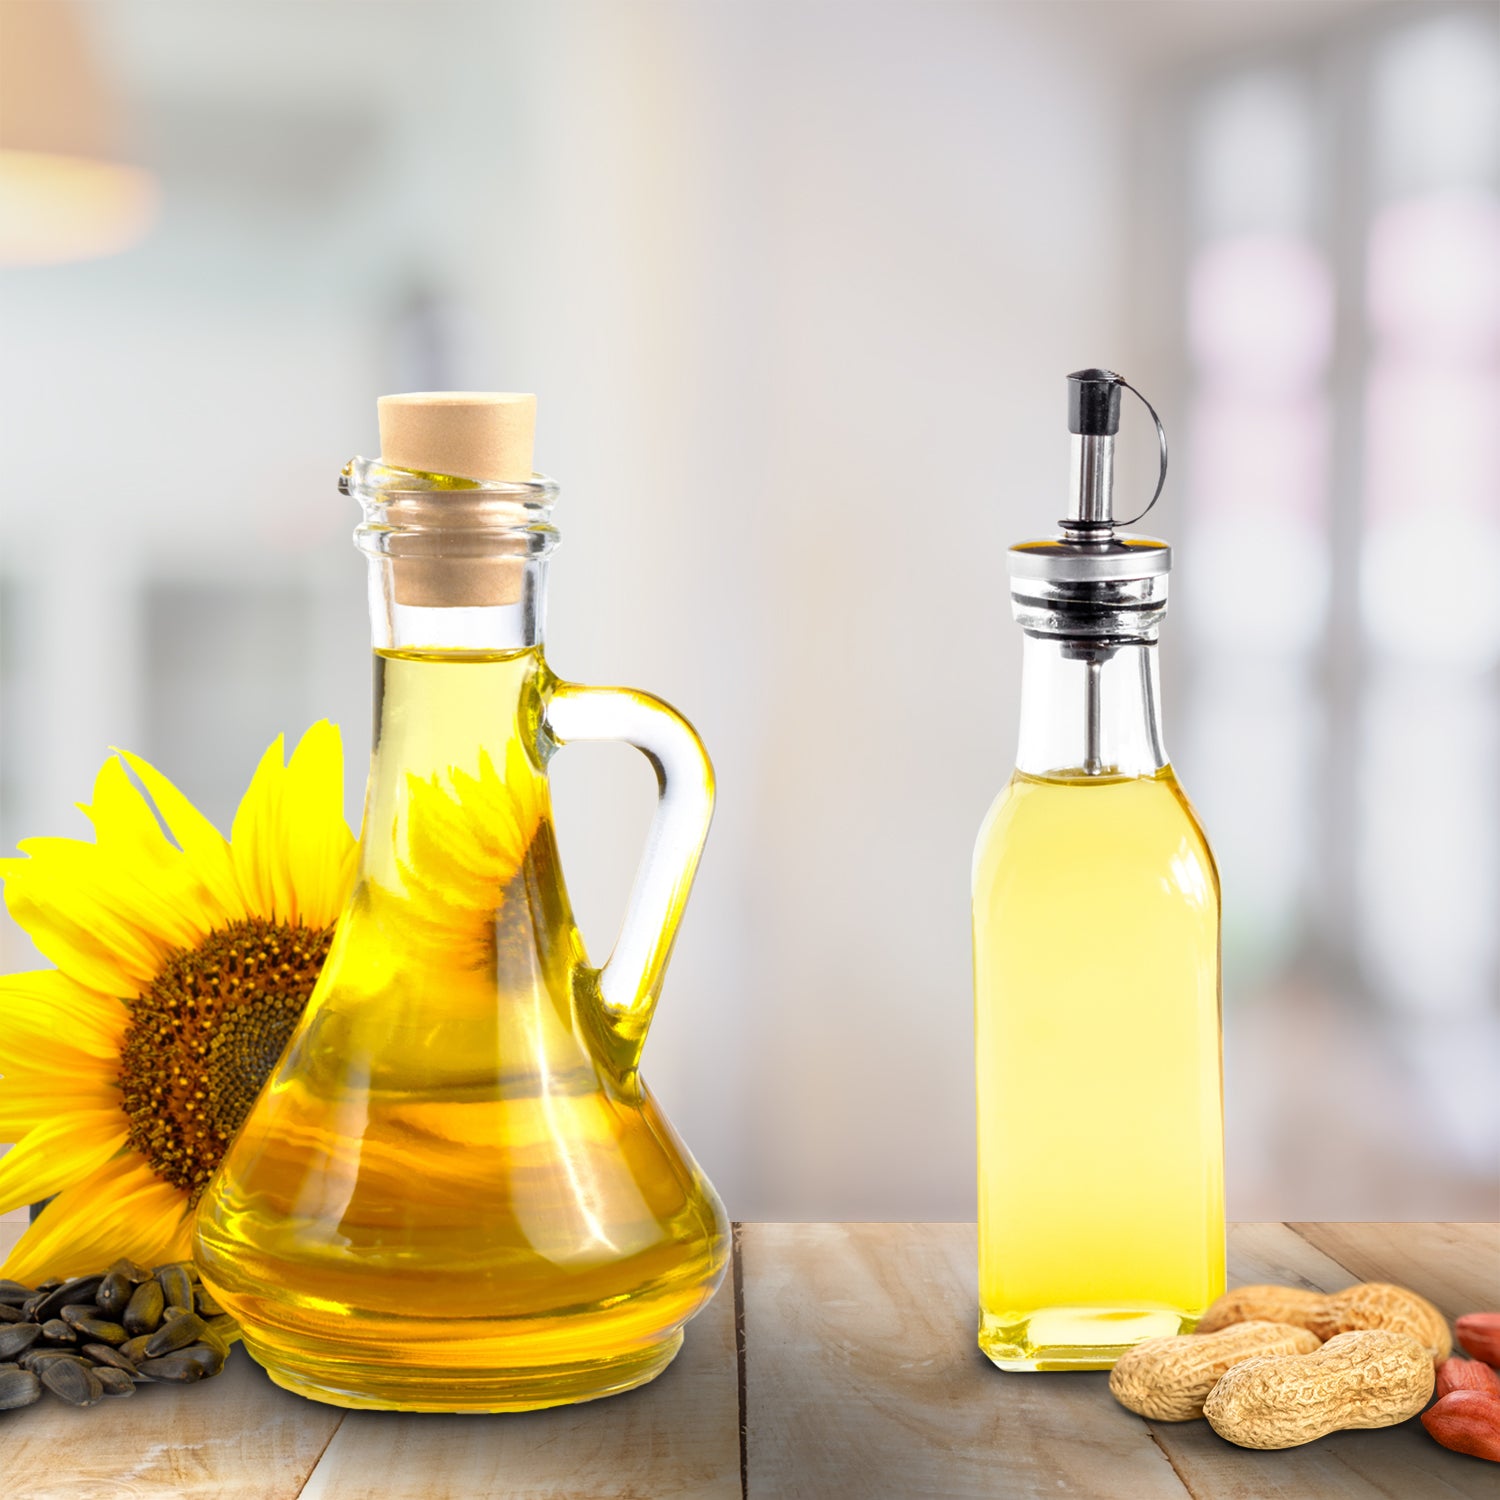 Groundnut Oil Vs Sunflower Oil - Which One Is Healthier ?